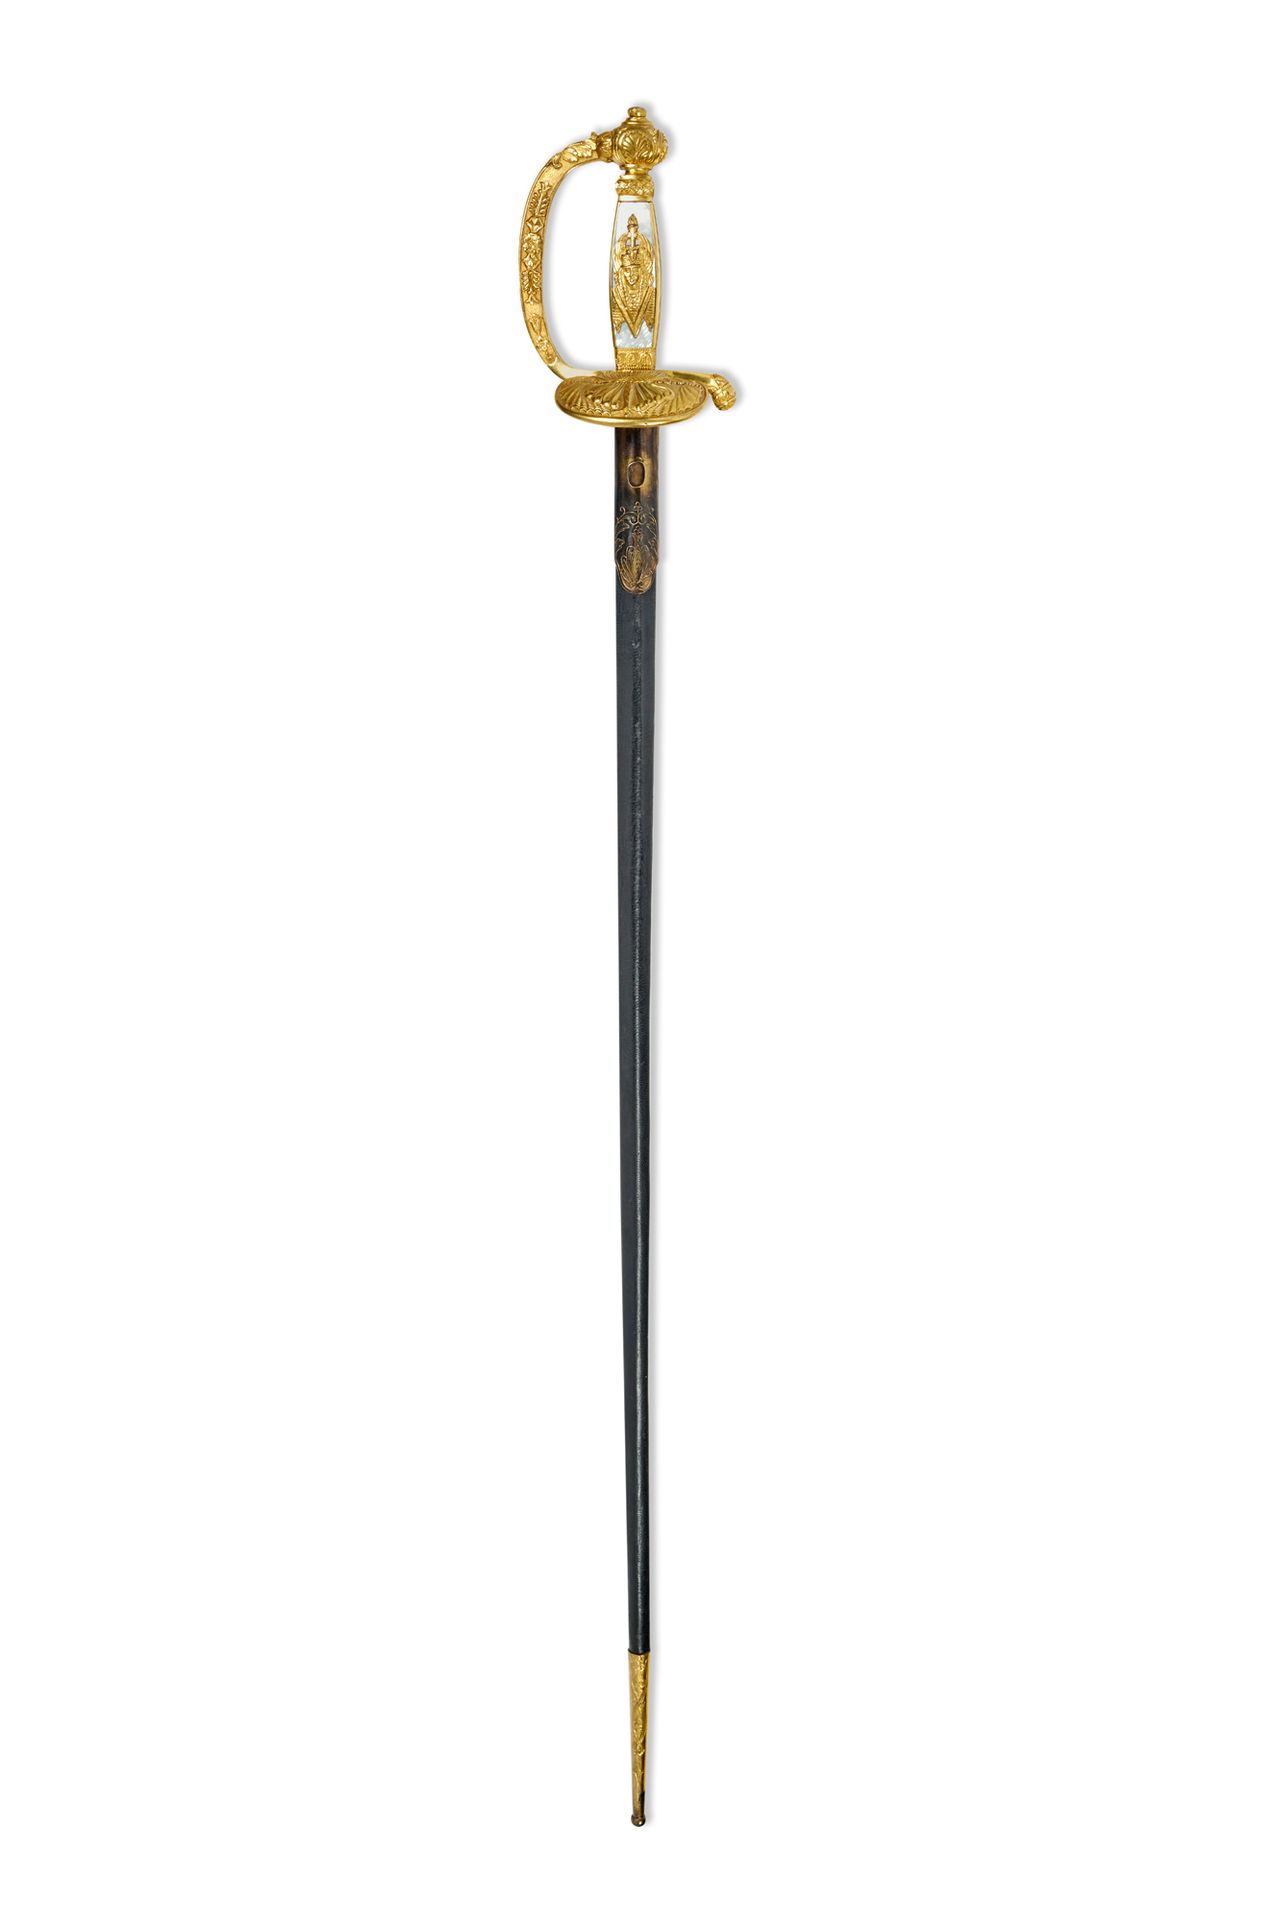 Null 
Academy of Moral Sciences

Sword of the model of the swords of academy of &hellip;